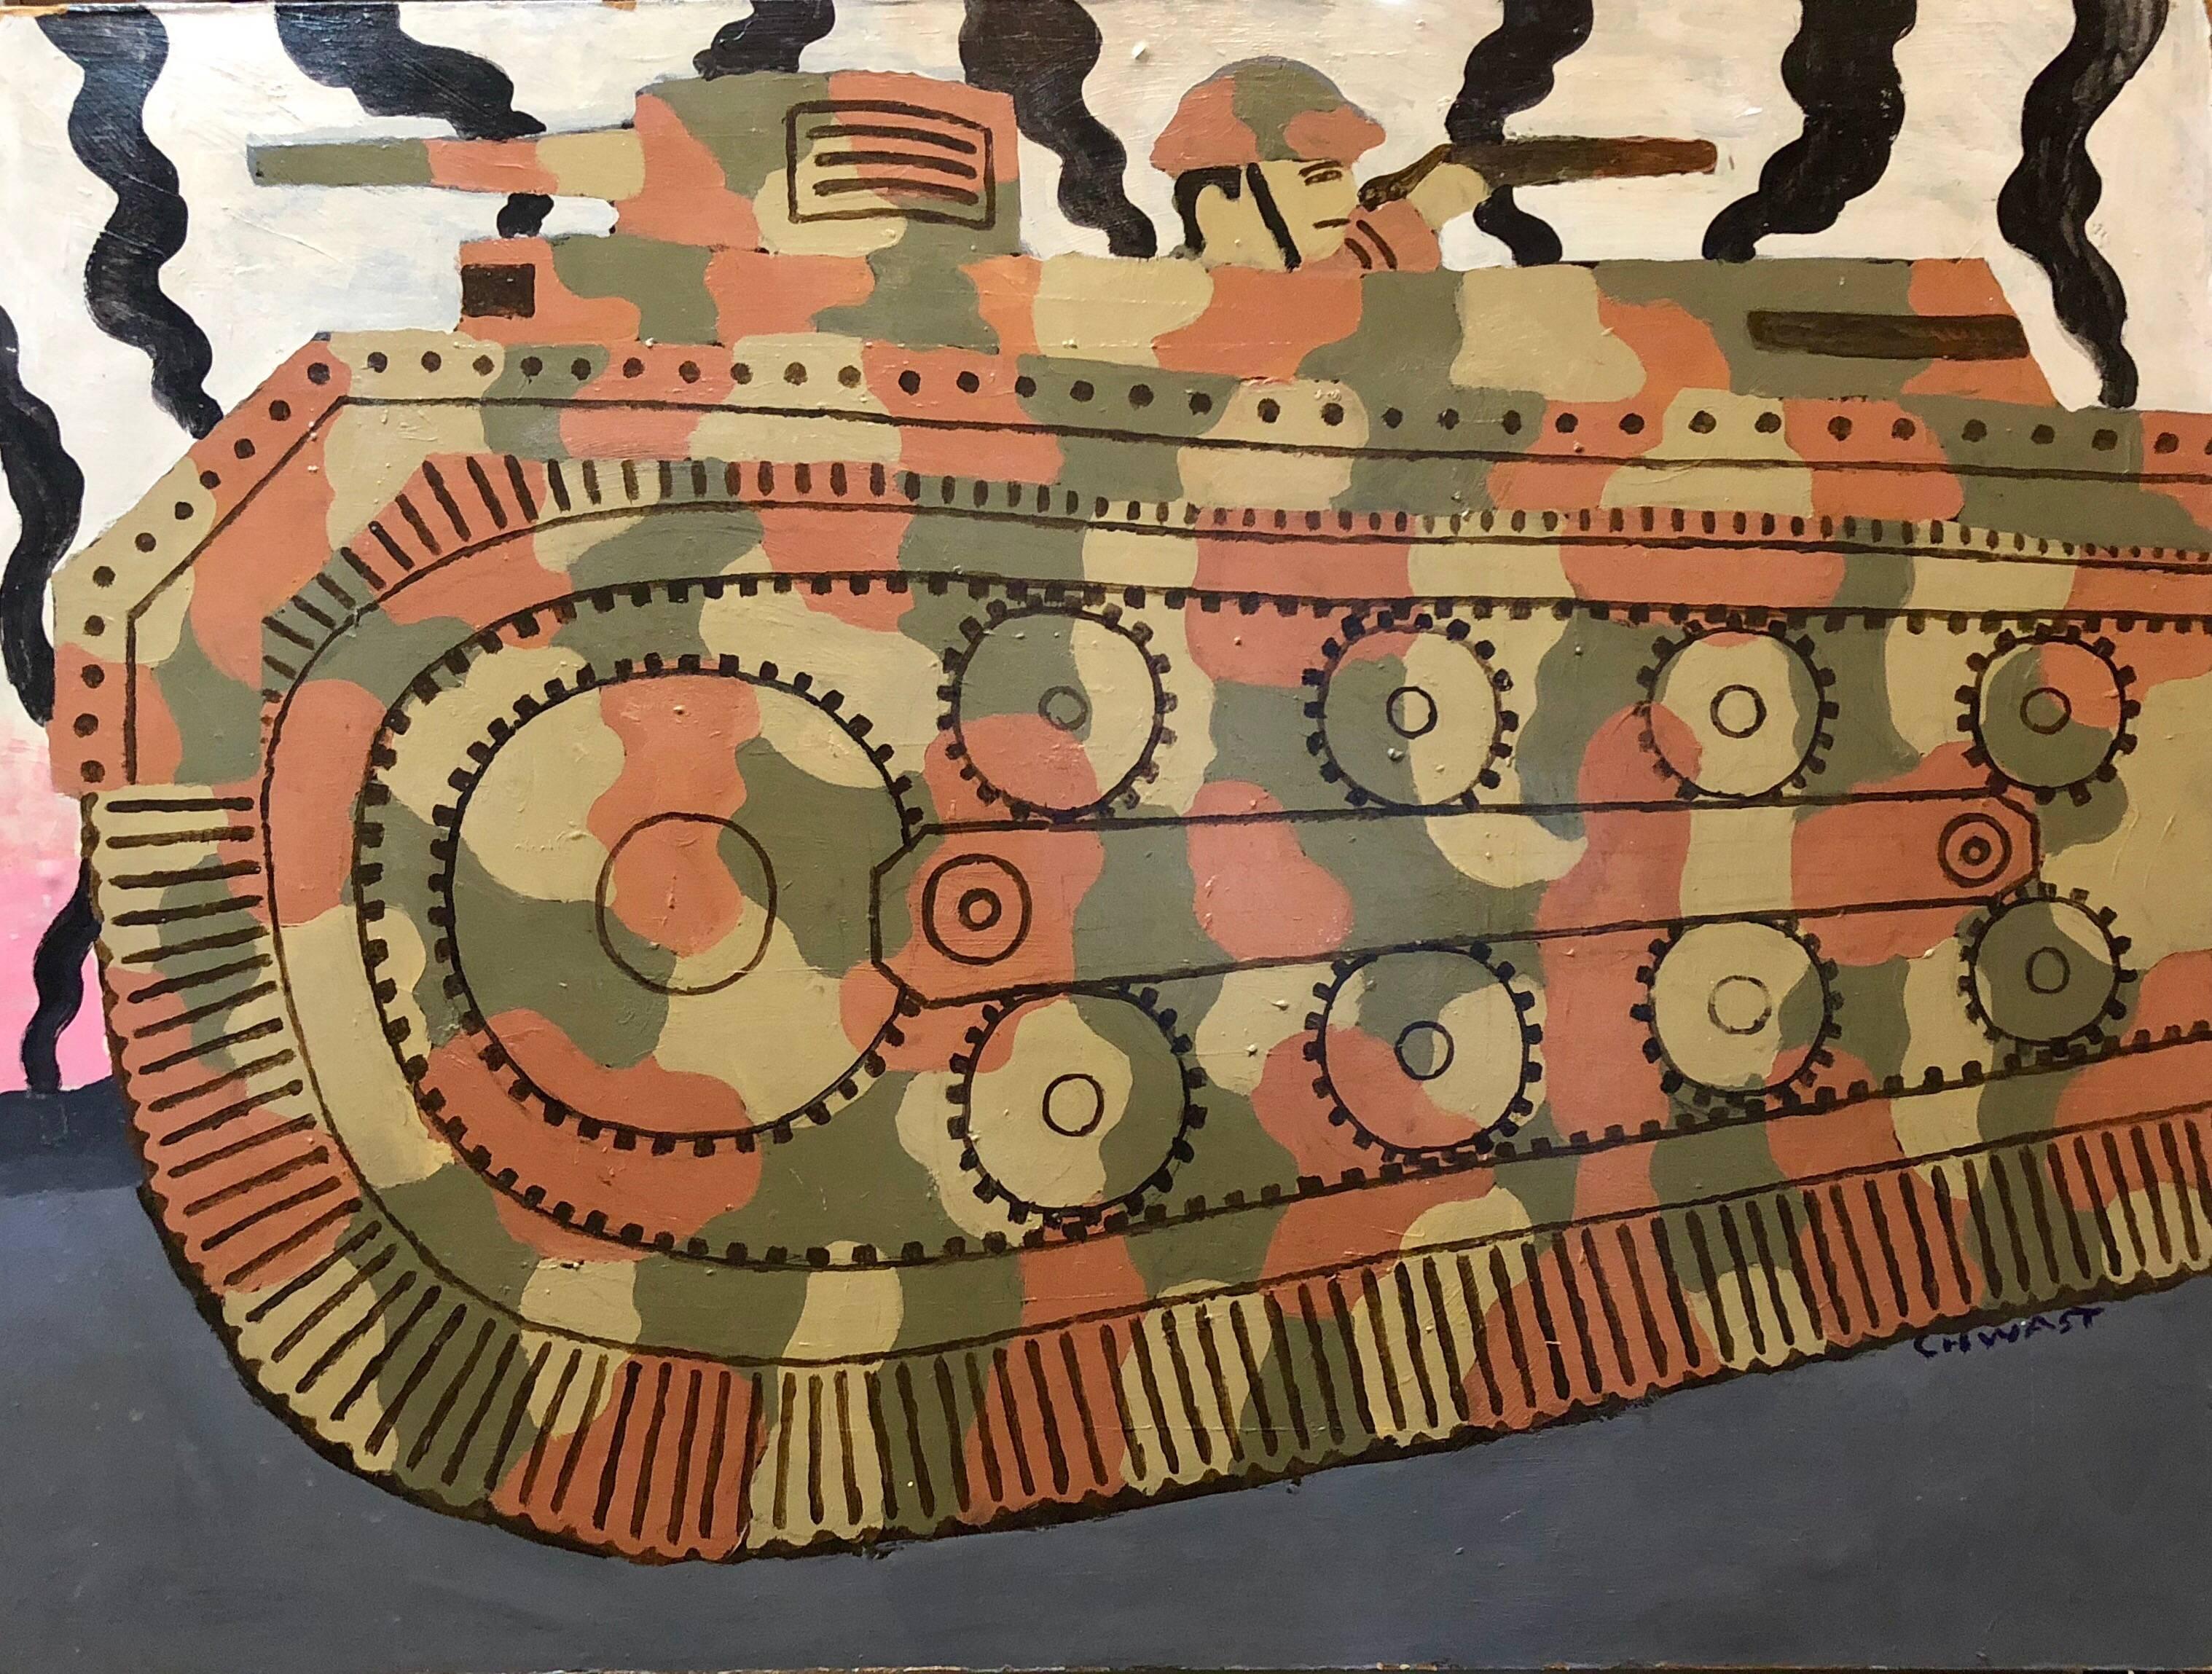 Seymour Chwast Figurative Painting - Large Oil Painting Of  Cartoony Camouflage Tank in Illustration Style